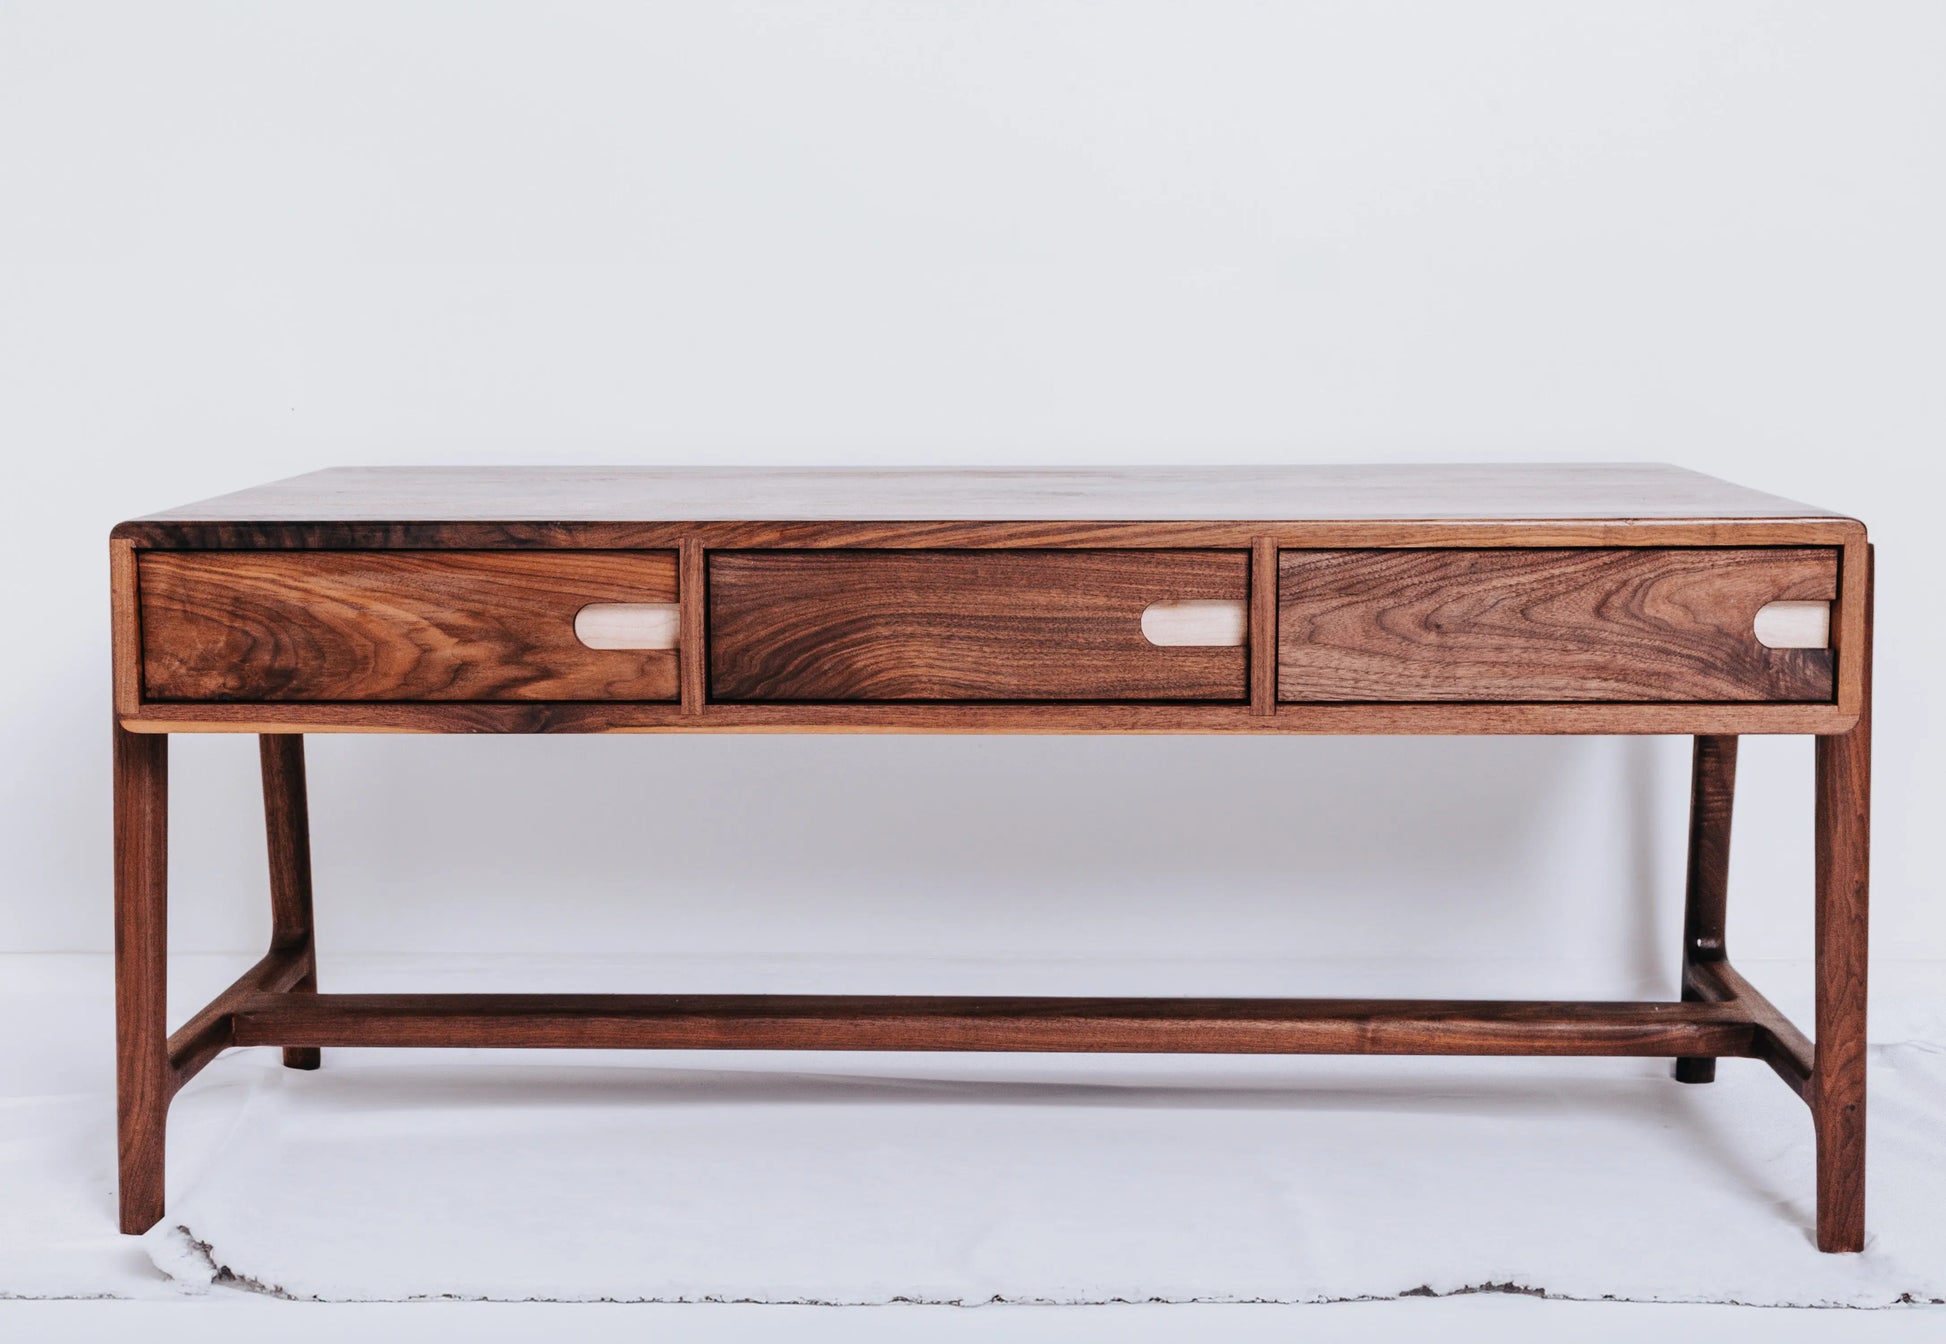 Scandinavian coffee table named Fjord crafted from black walnut with rock maple drawer pulls